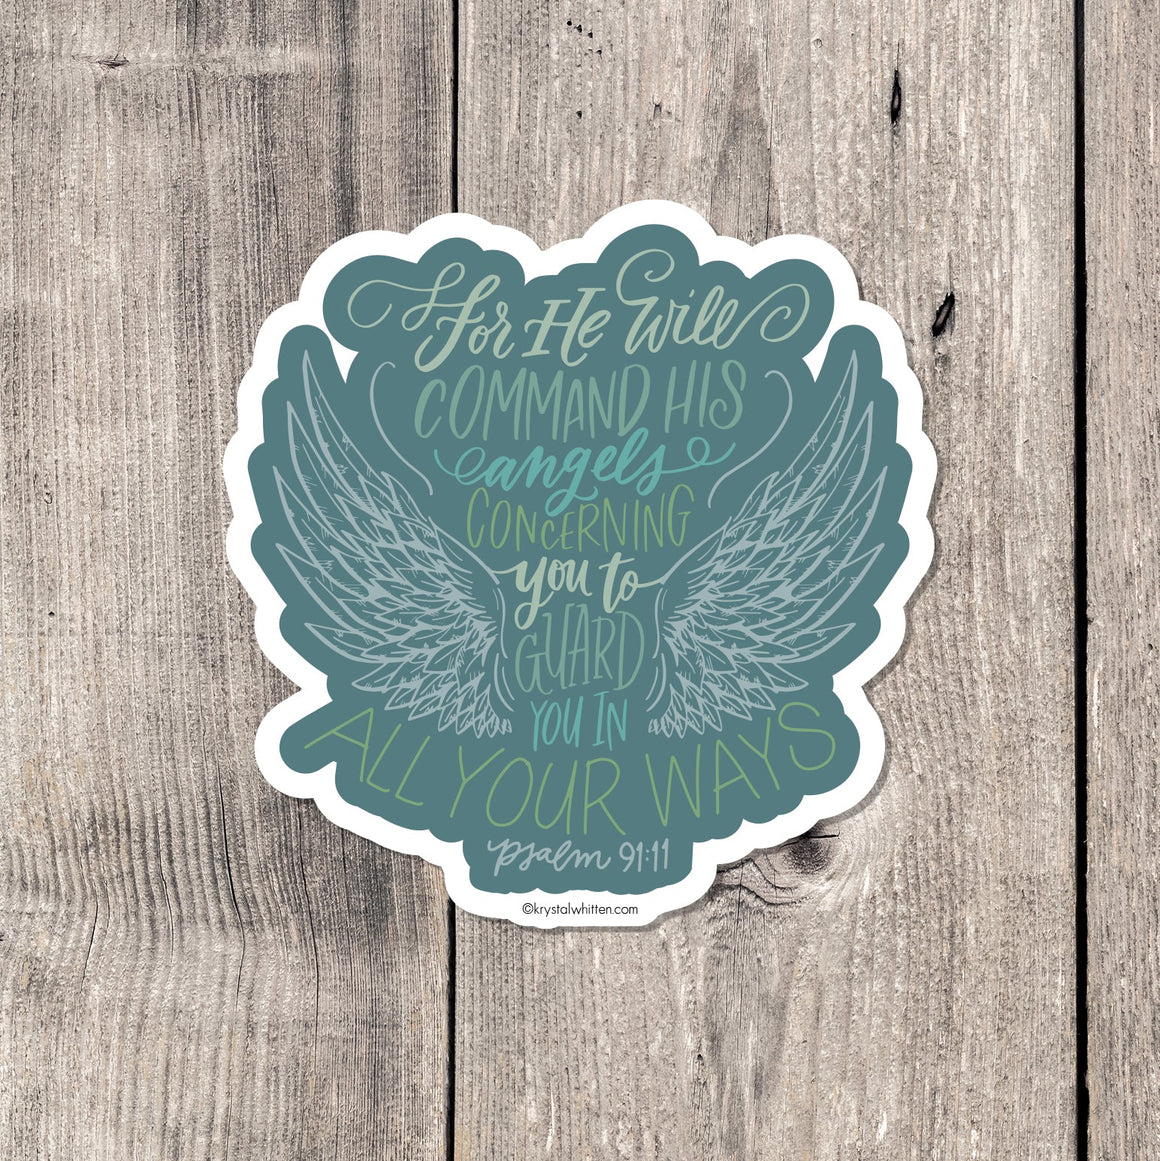 "He will command his angels concerning you" sticker